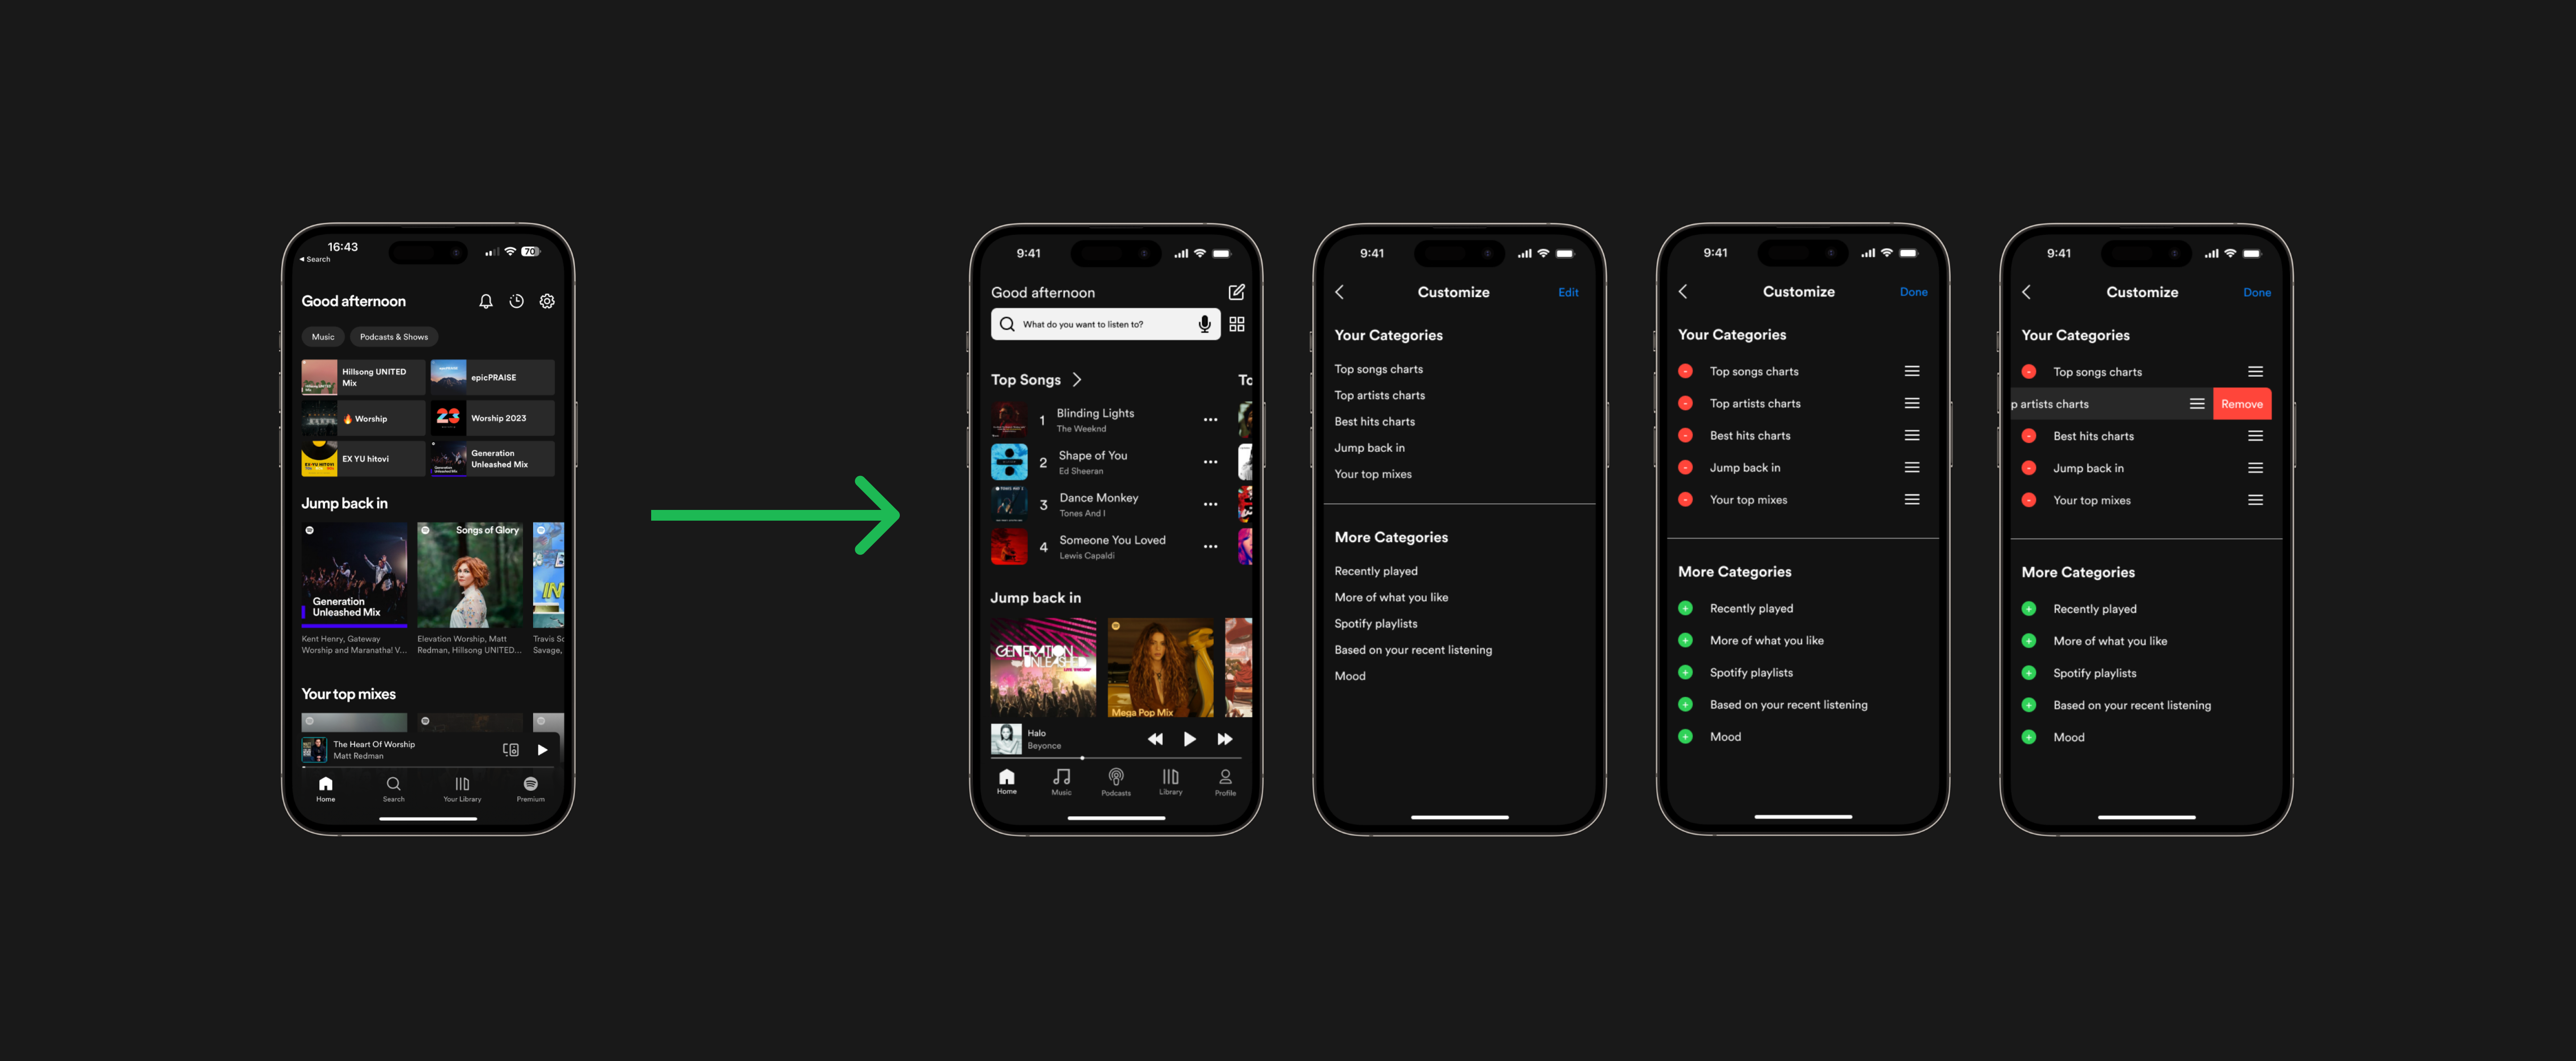 Redesigning Spotify!. Maintaining the leader's position in…, by Petra